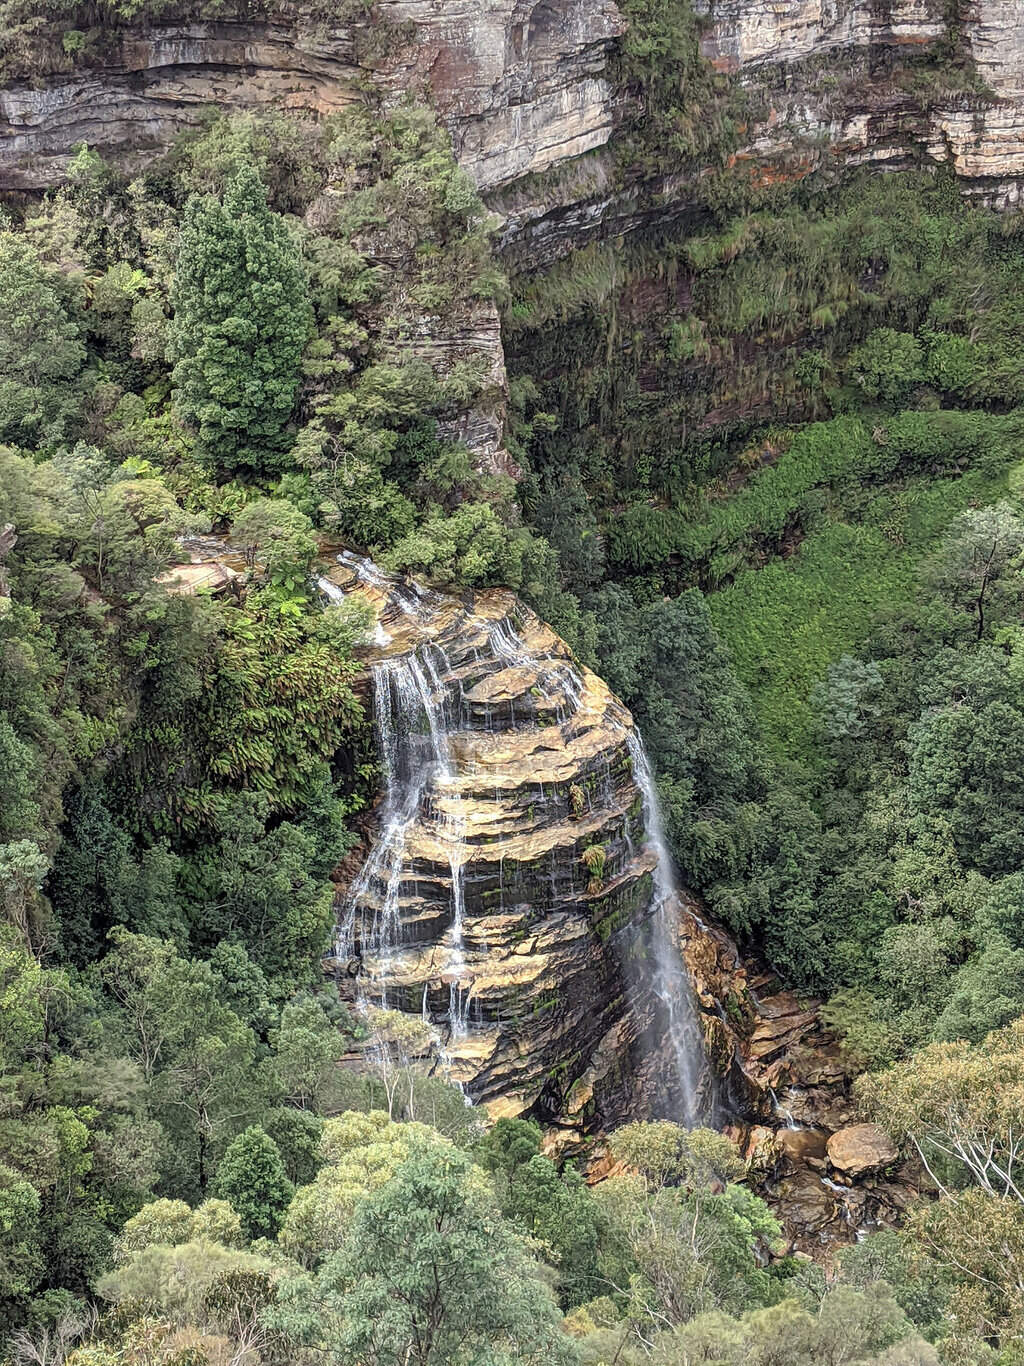 Water fans out and flows down the rocky mountain side at Bridal Veil Falls in the Blue Mountains National Park